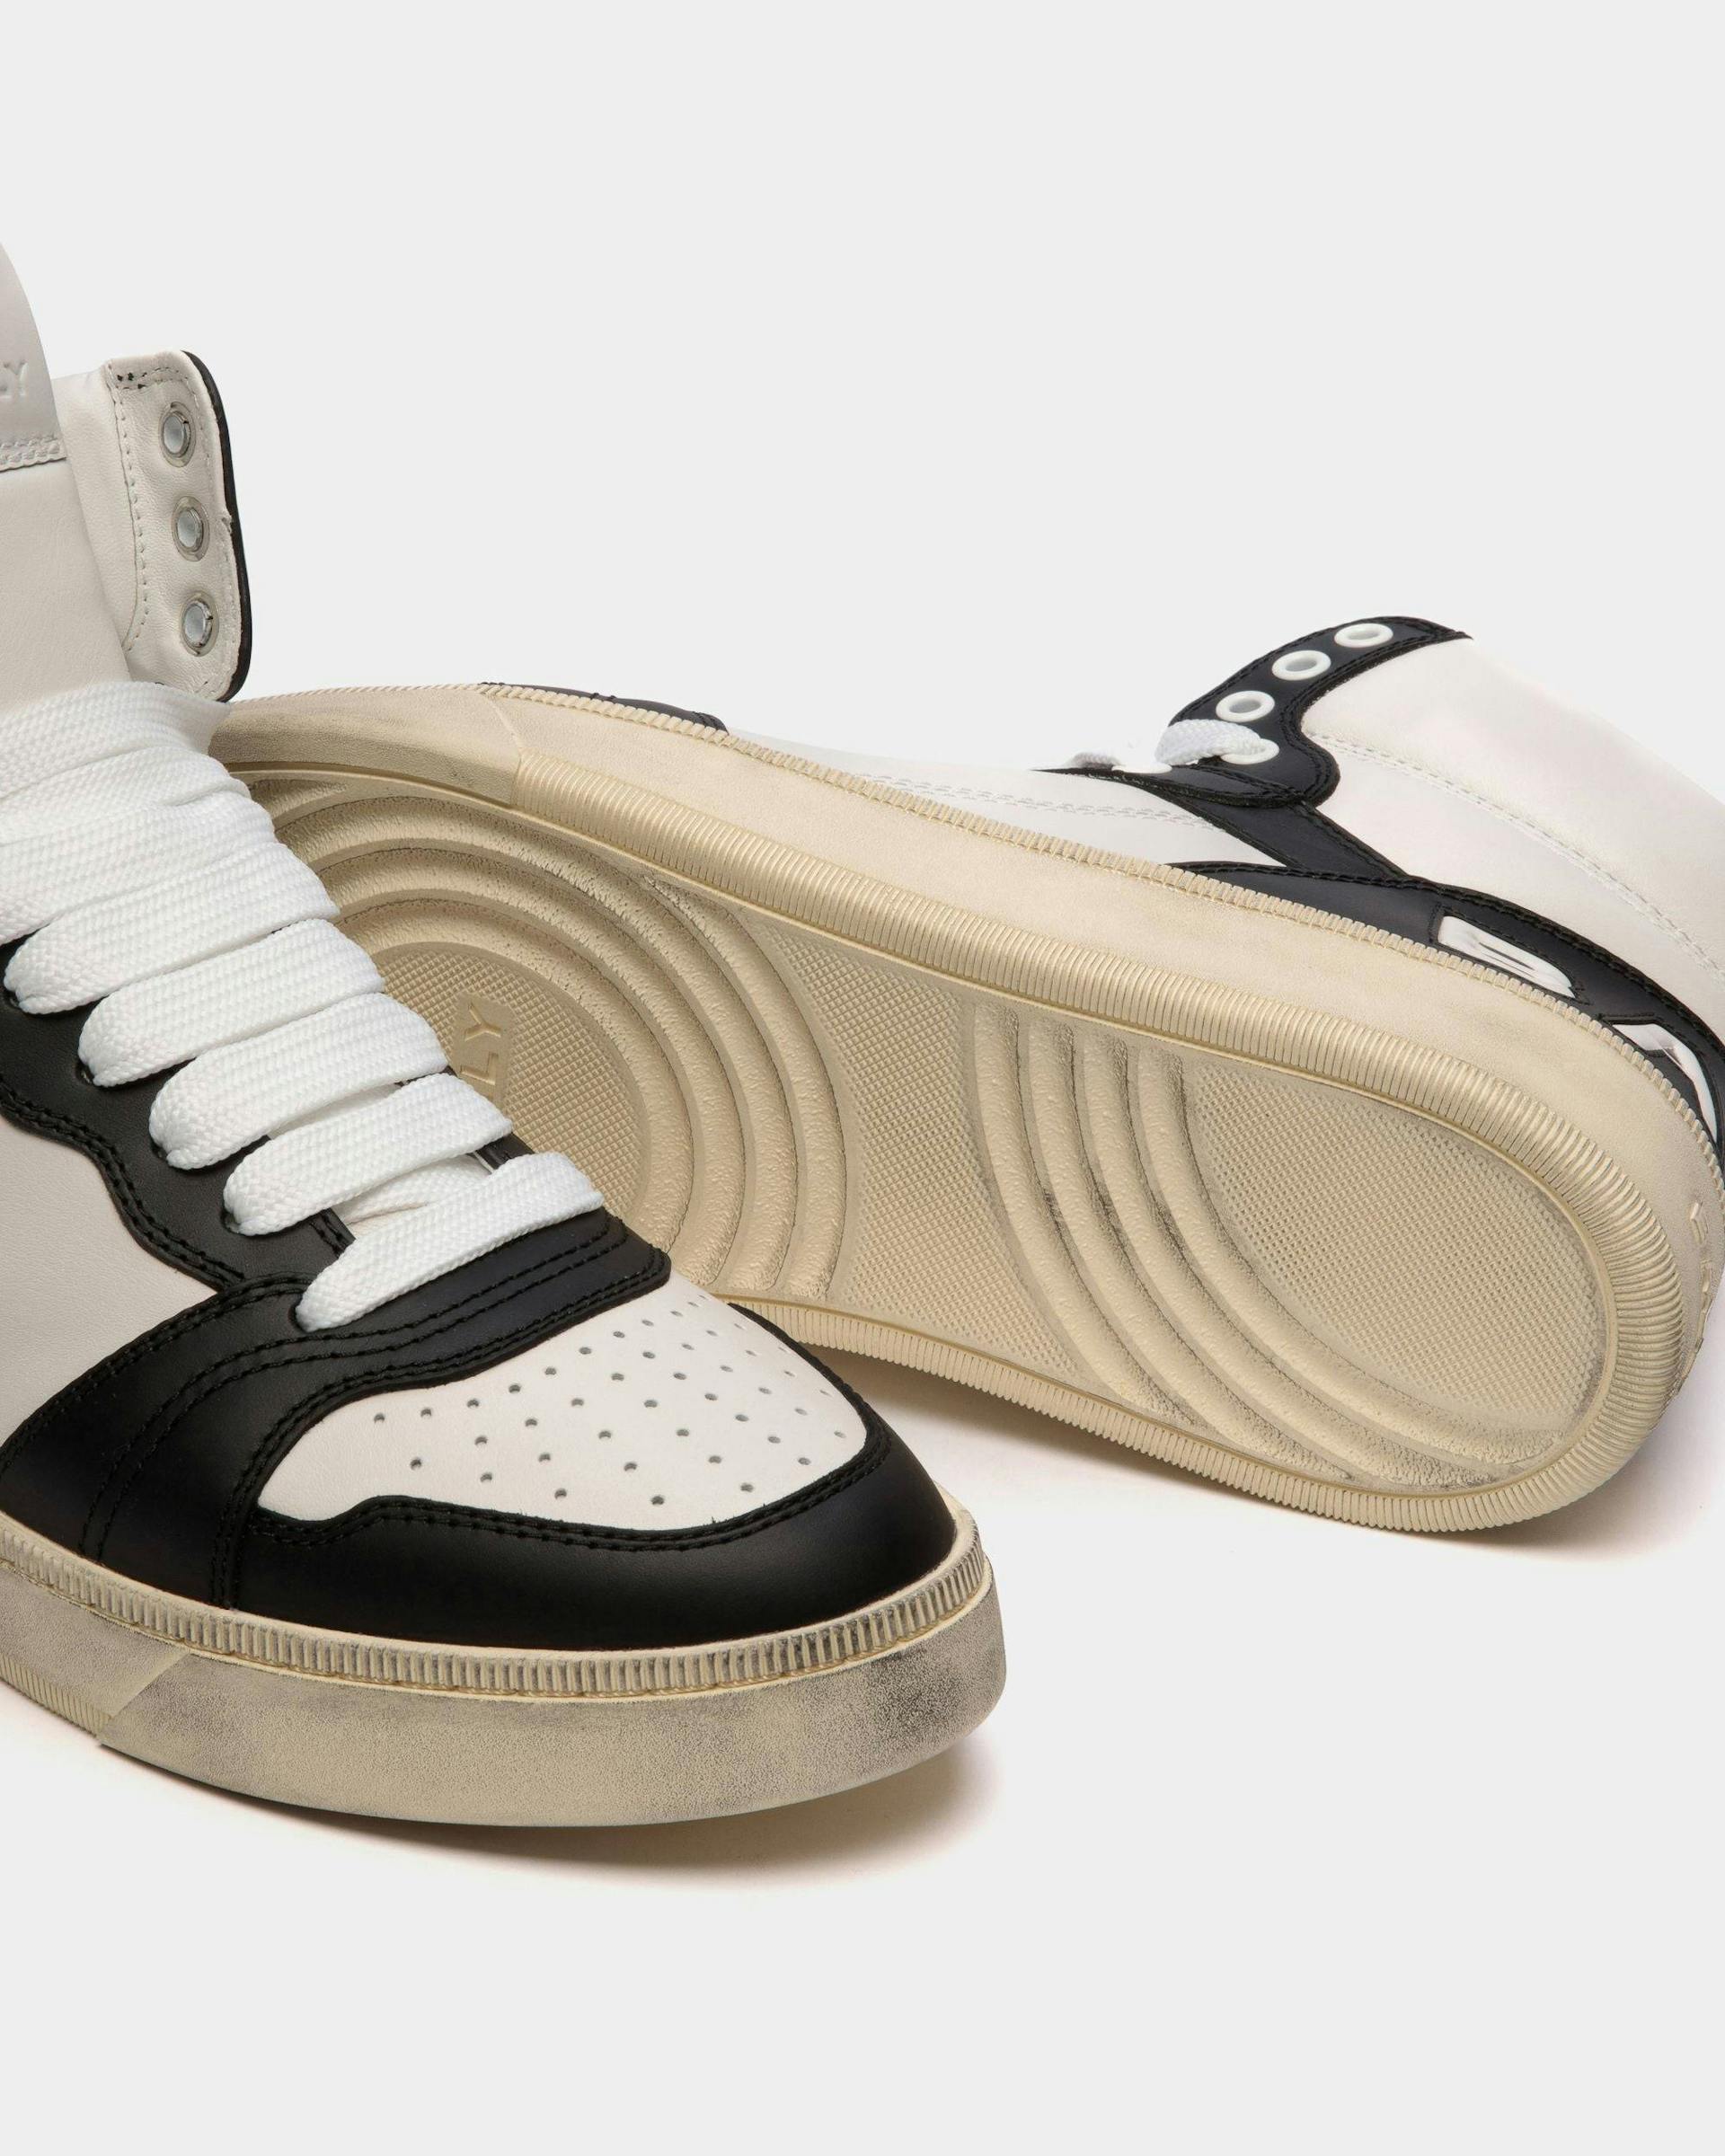 Men's Raise High-Top Sneaker in Black And White Leather | Bally | Still Life Below